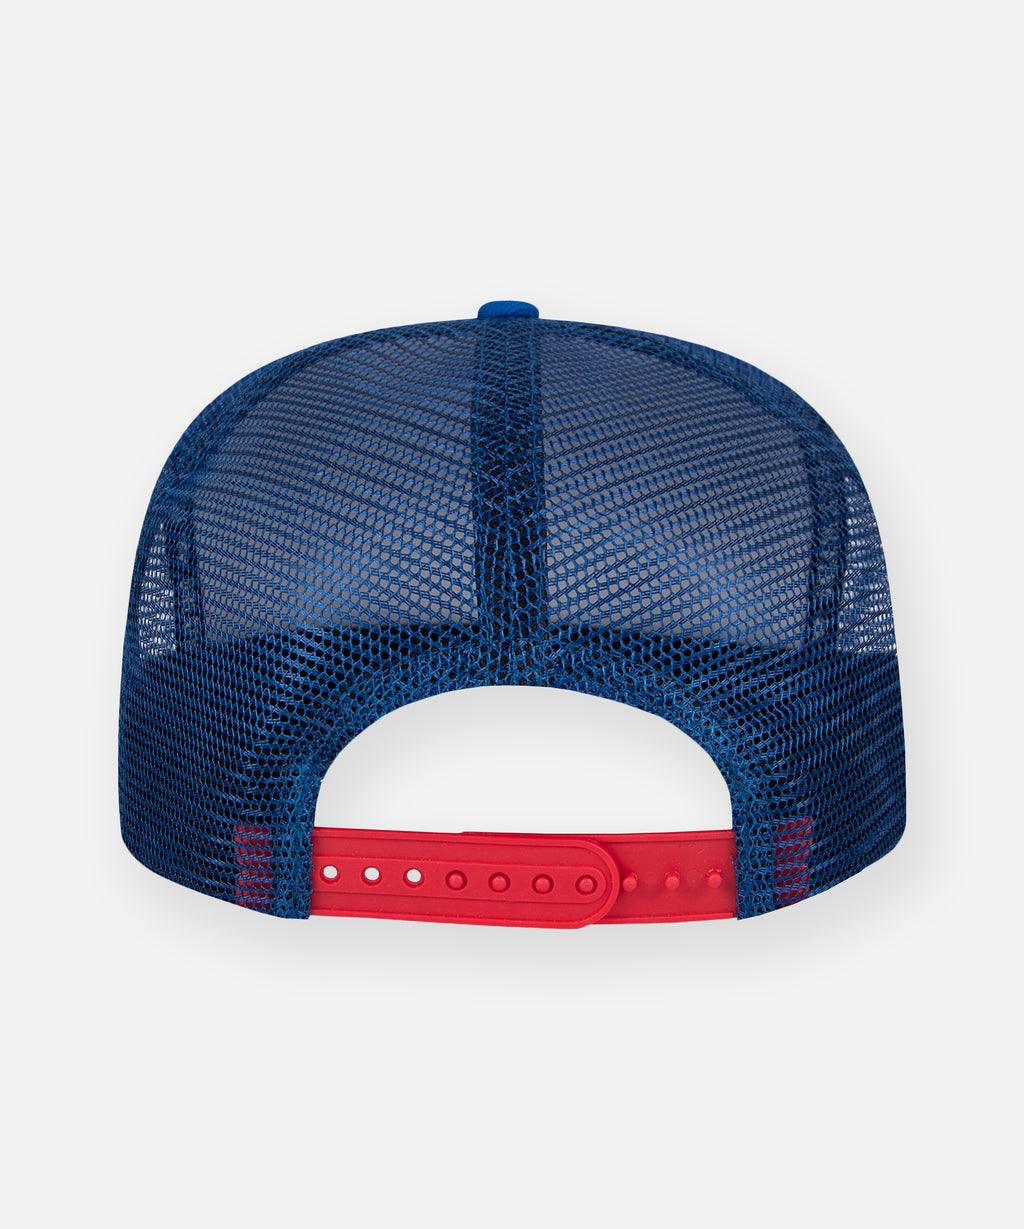  Red snapback on Planes Greatness Trucker Hat color Nautical Blue.